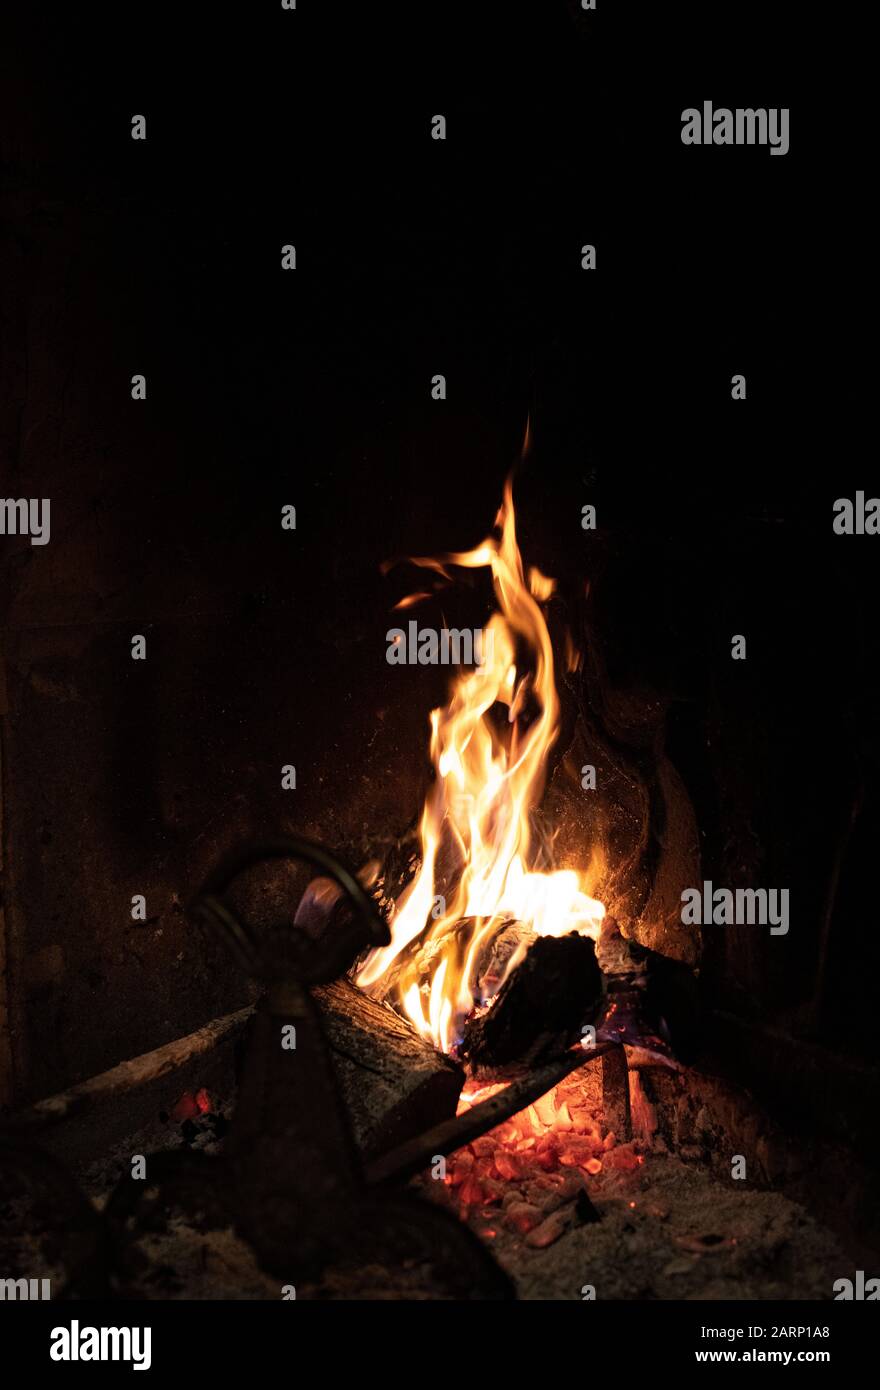 Fiery flames of a burning fire in a brick fireplace glowing in the darkness for heating in winter Stock Photo